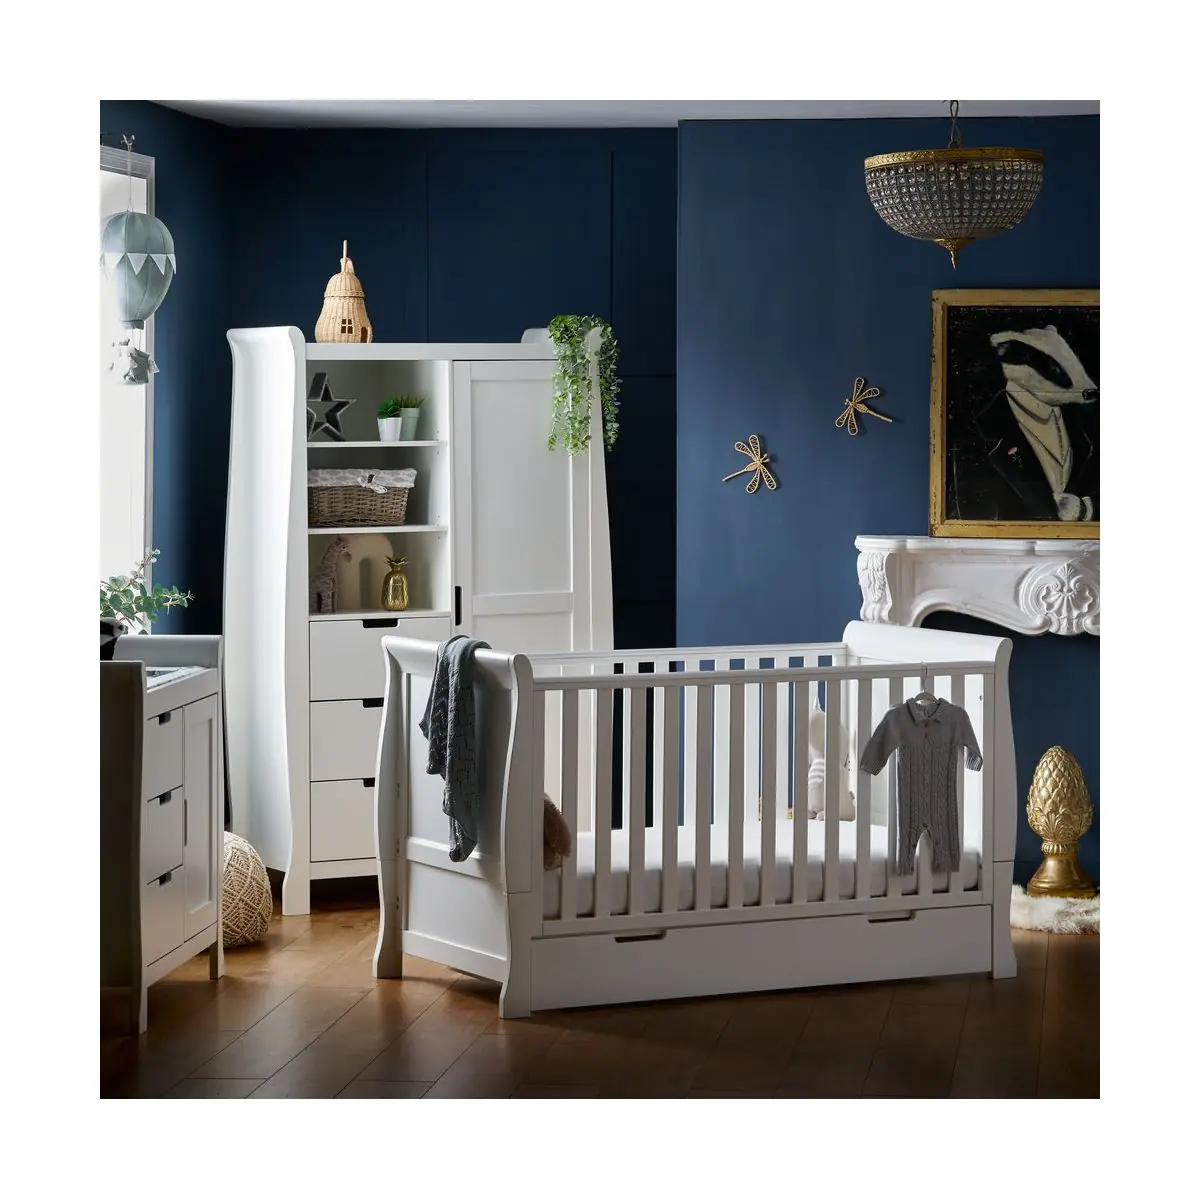 Image of Obaby Stamford Classic Sleigh 3 Piece Furniture Roomset - White